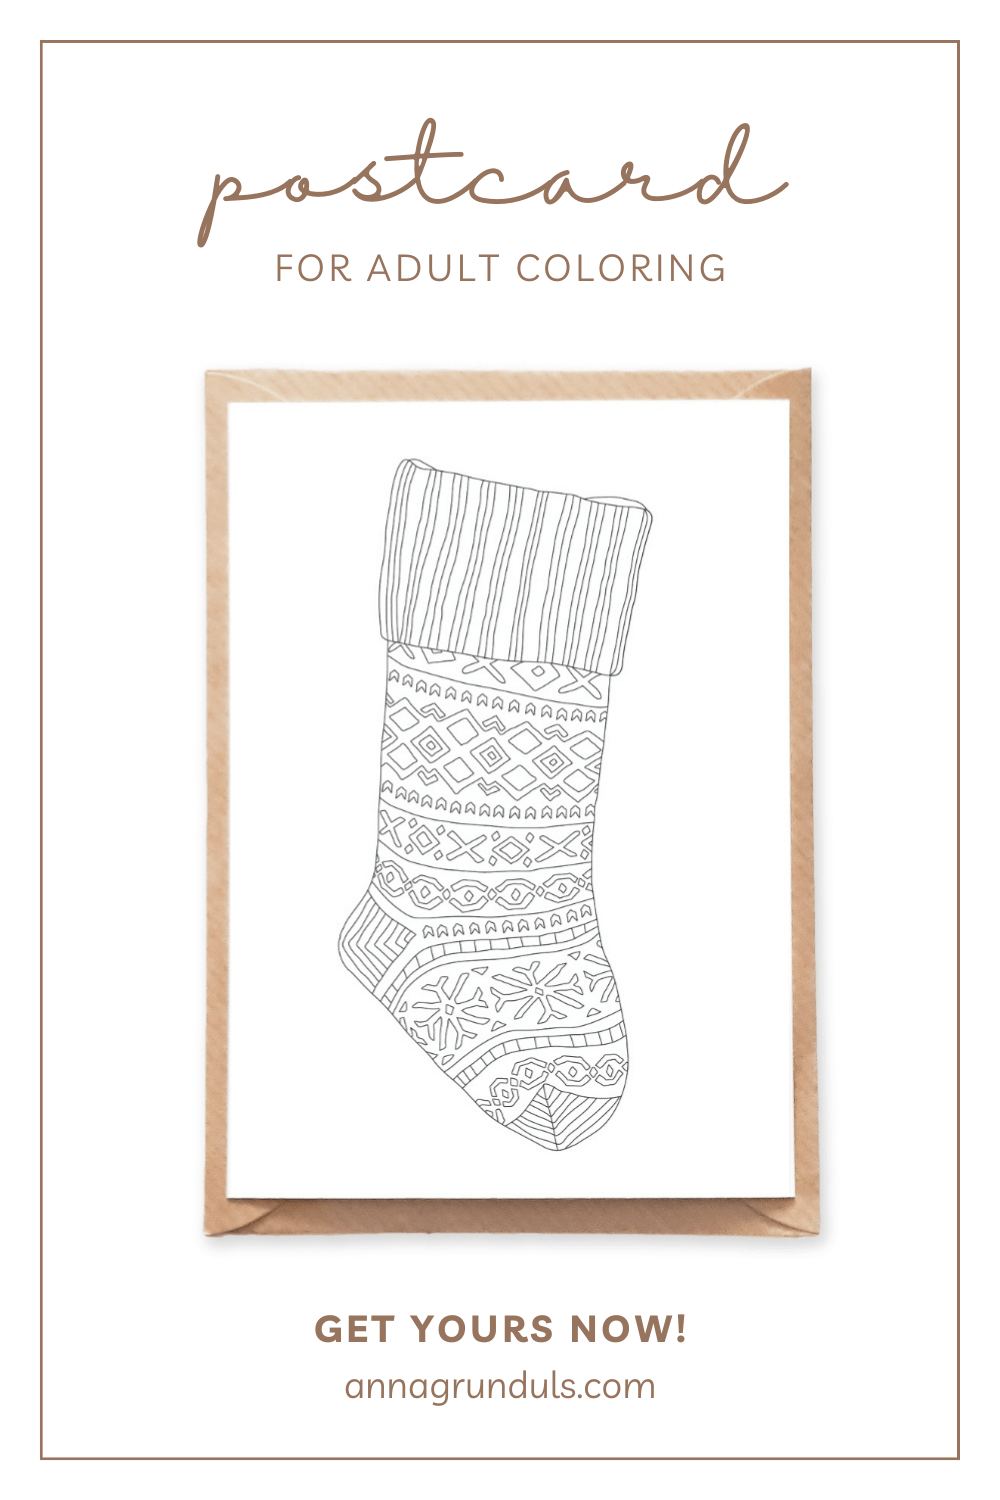 christmas stocking postcard for adult coloring pinterest pin